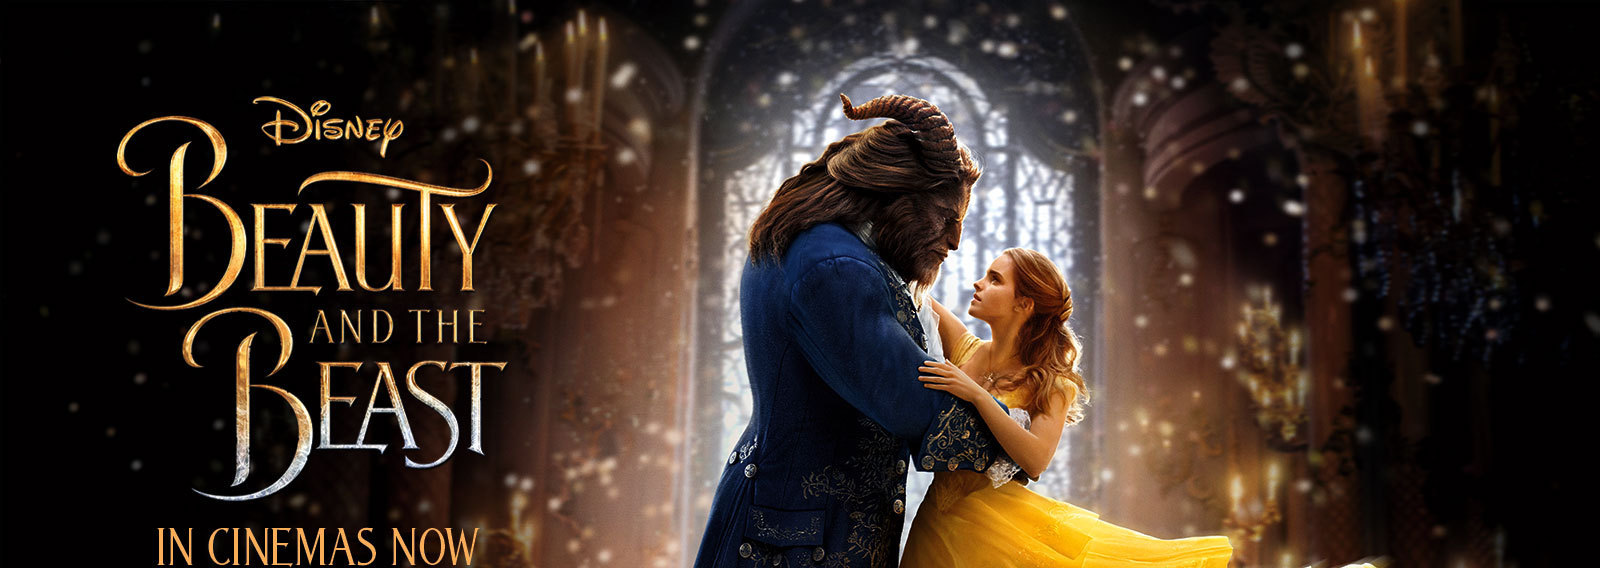 Beauty and the Beast 2017 Cast, Release Date and Movie Plot